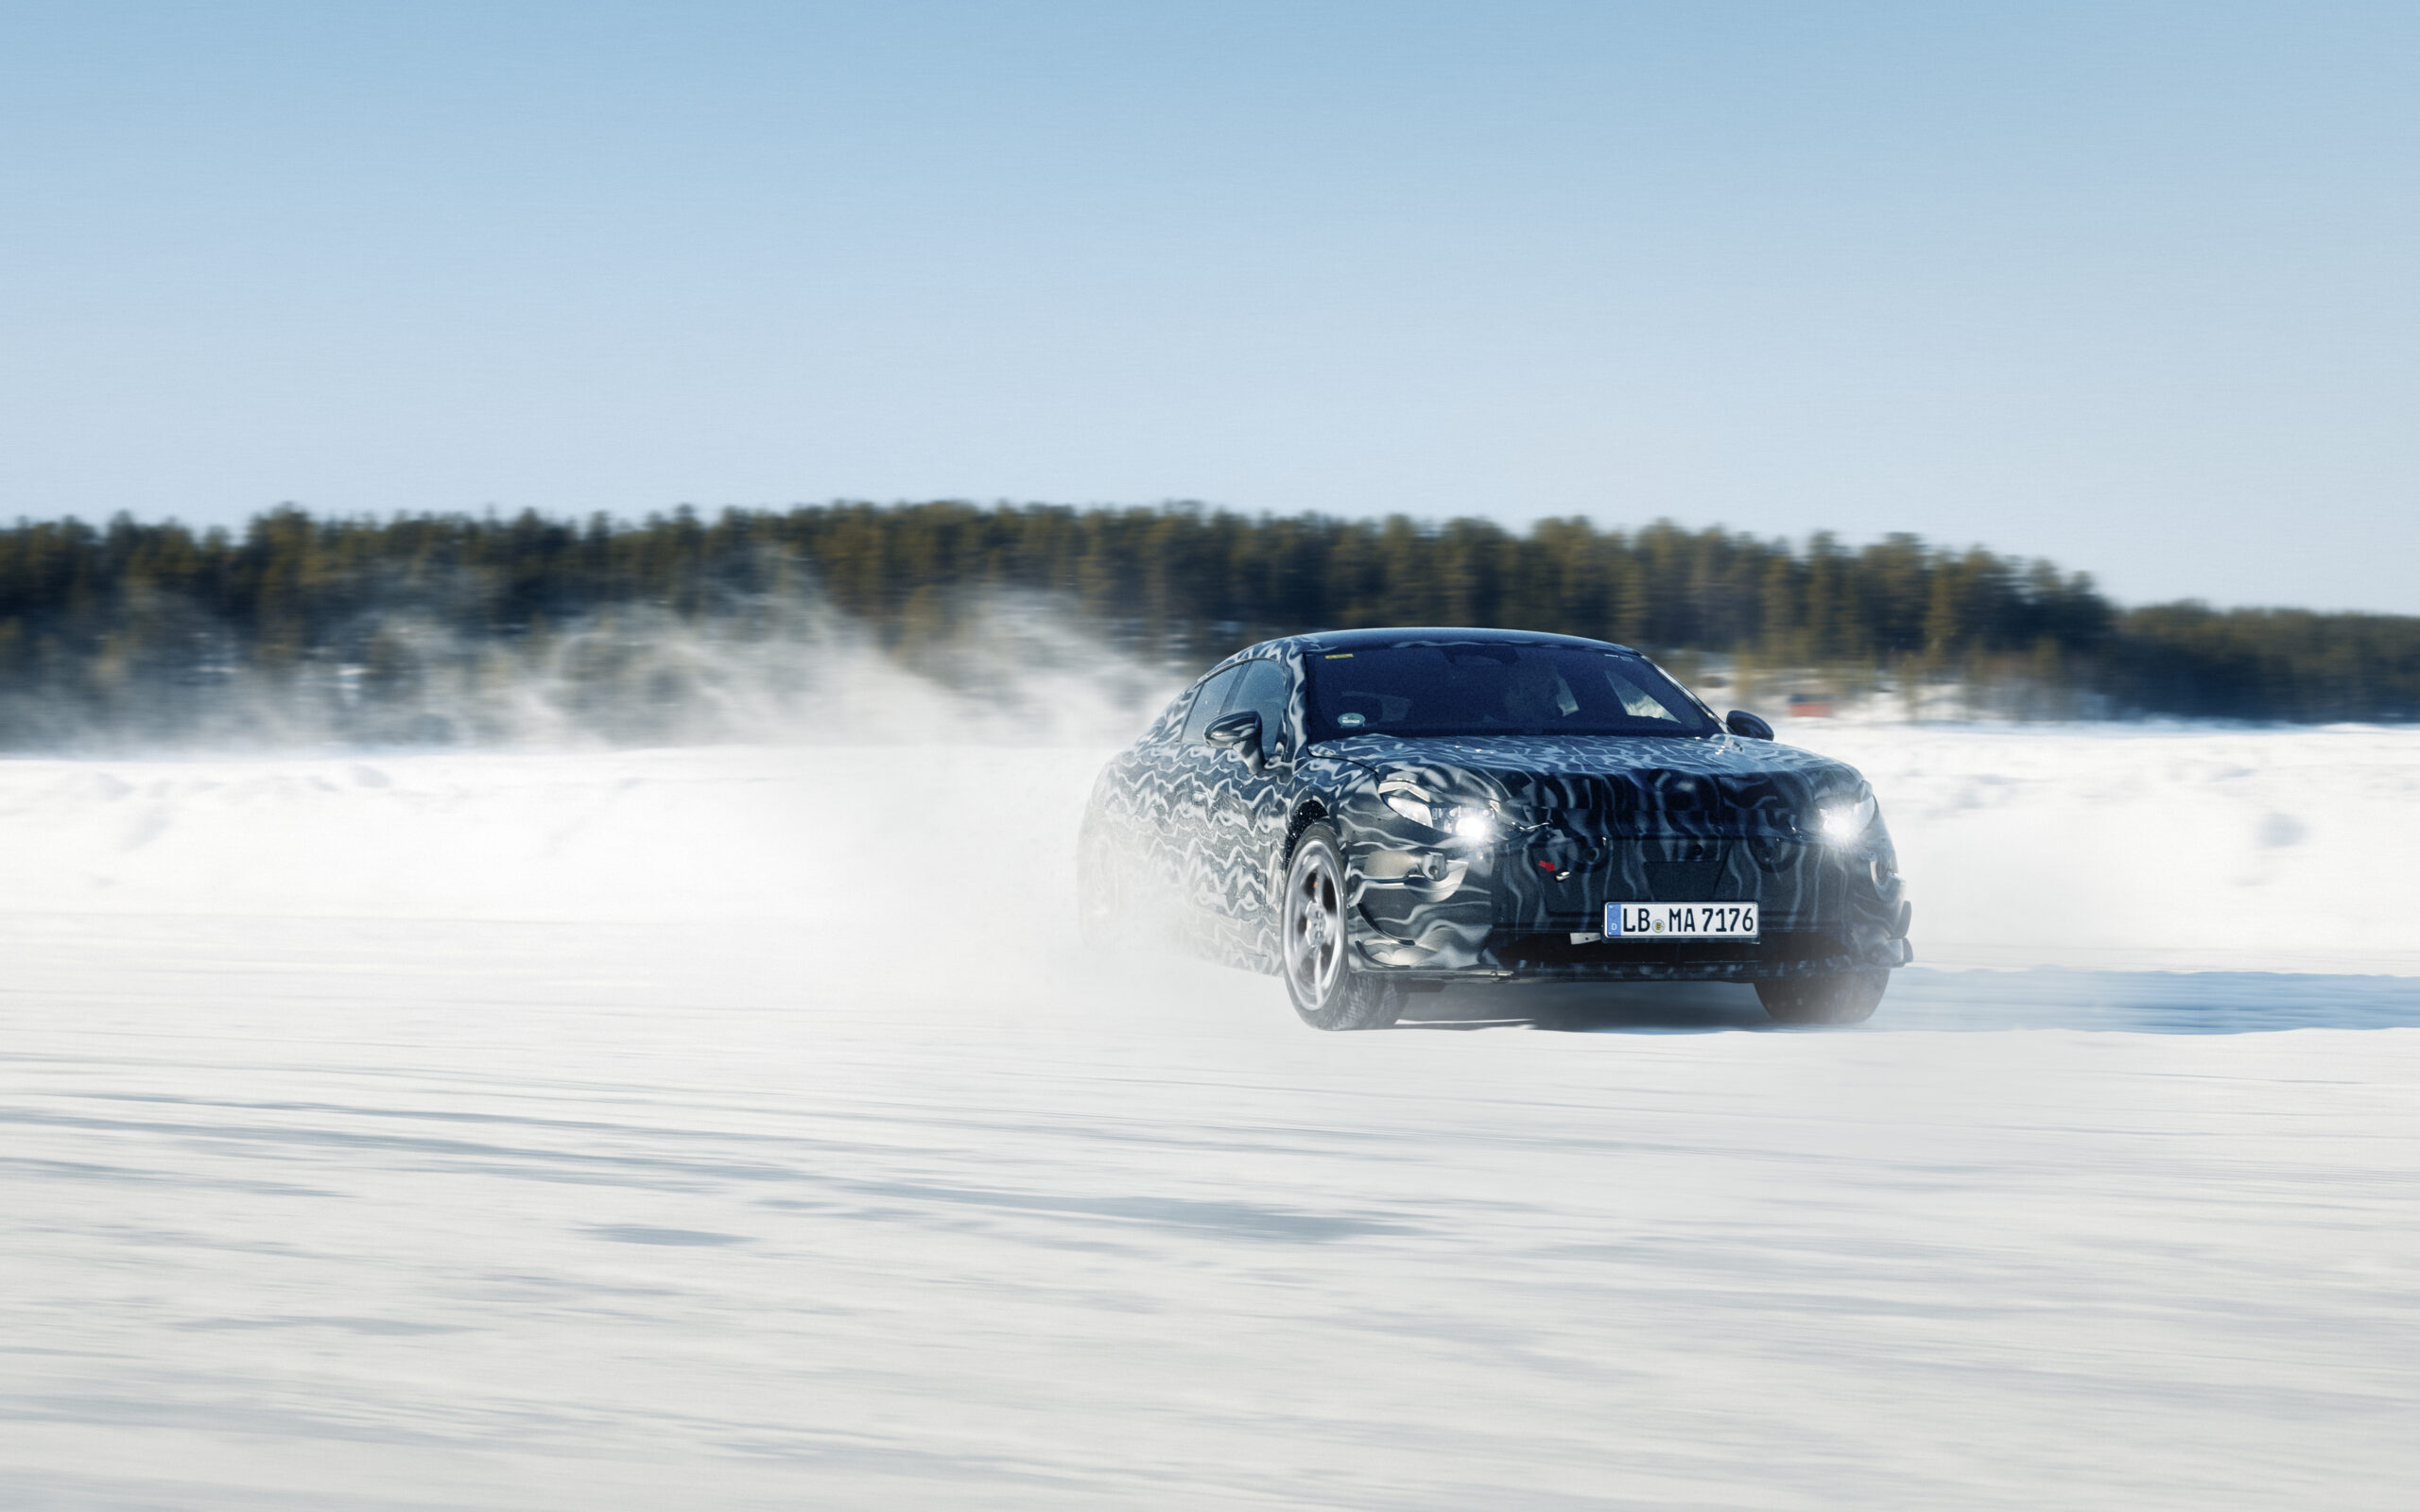 Temperatures as low as ‑25°C will test the EV's cold weather capabilities.